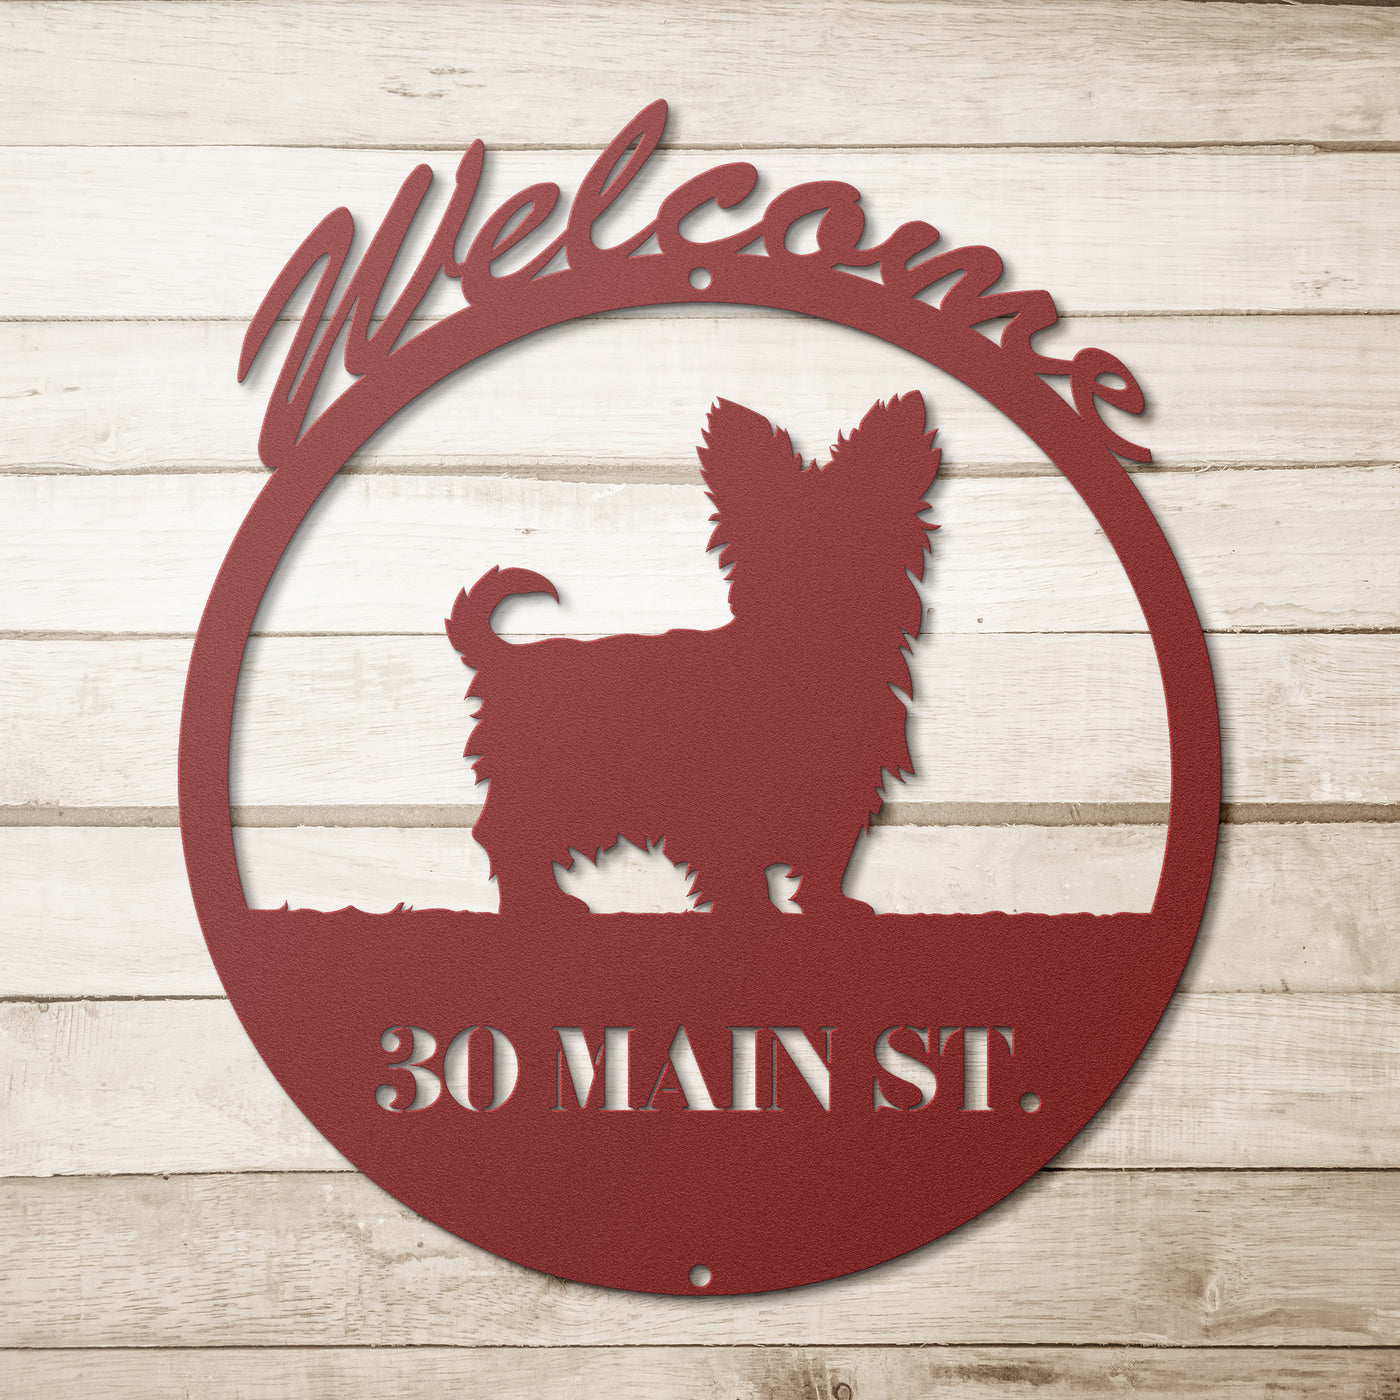 red circular dog themed metal sign with text "welcome, thirty main st."